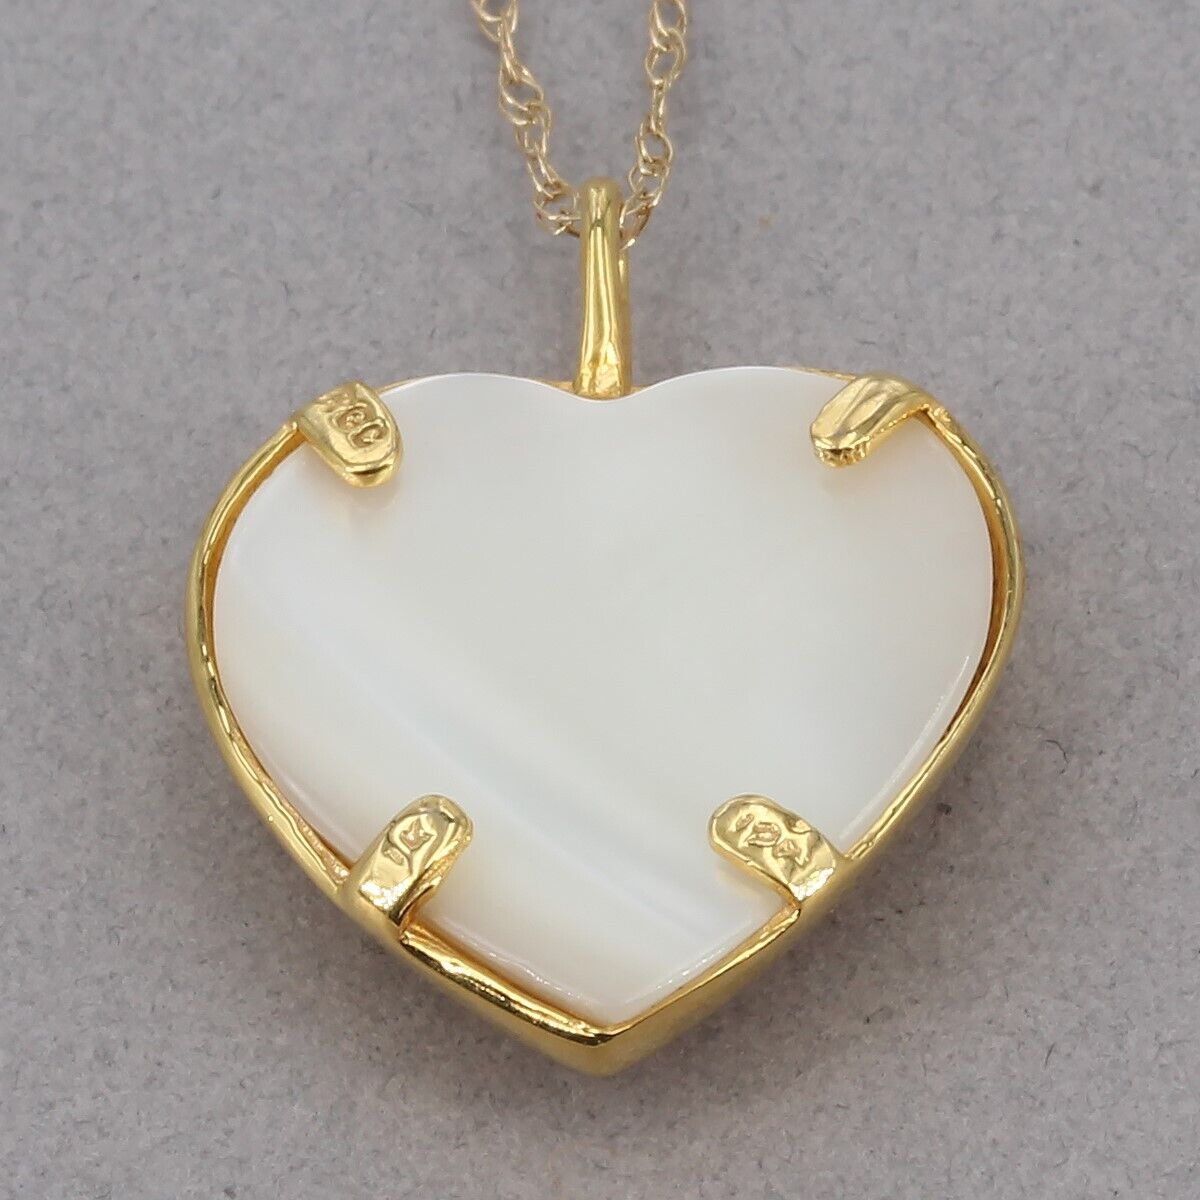 Rushmore Gold Co. 10K Black Hills Gold Mother of Pearl Heart Pendant Necklace